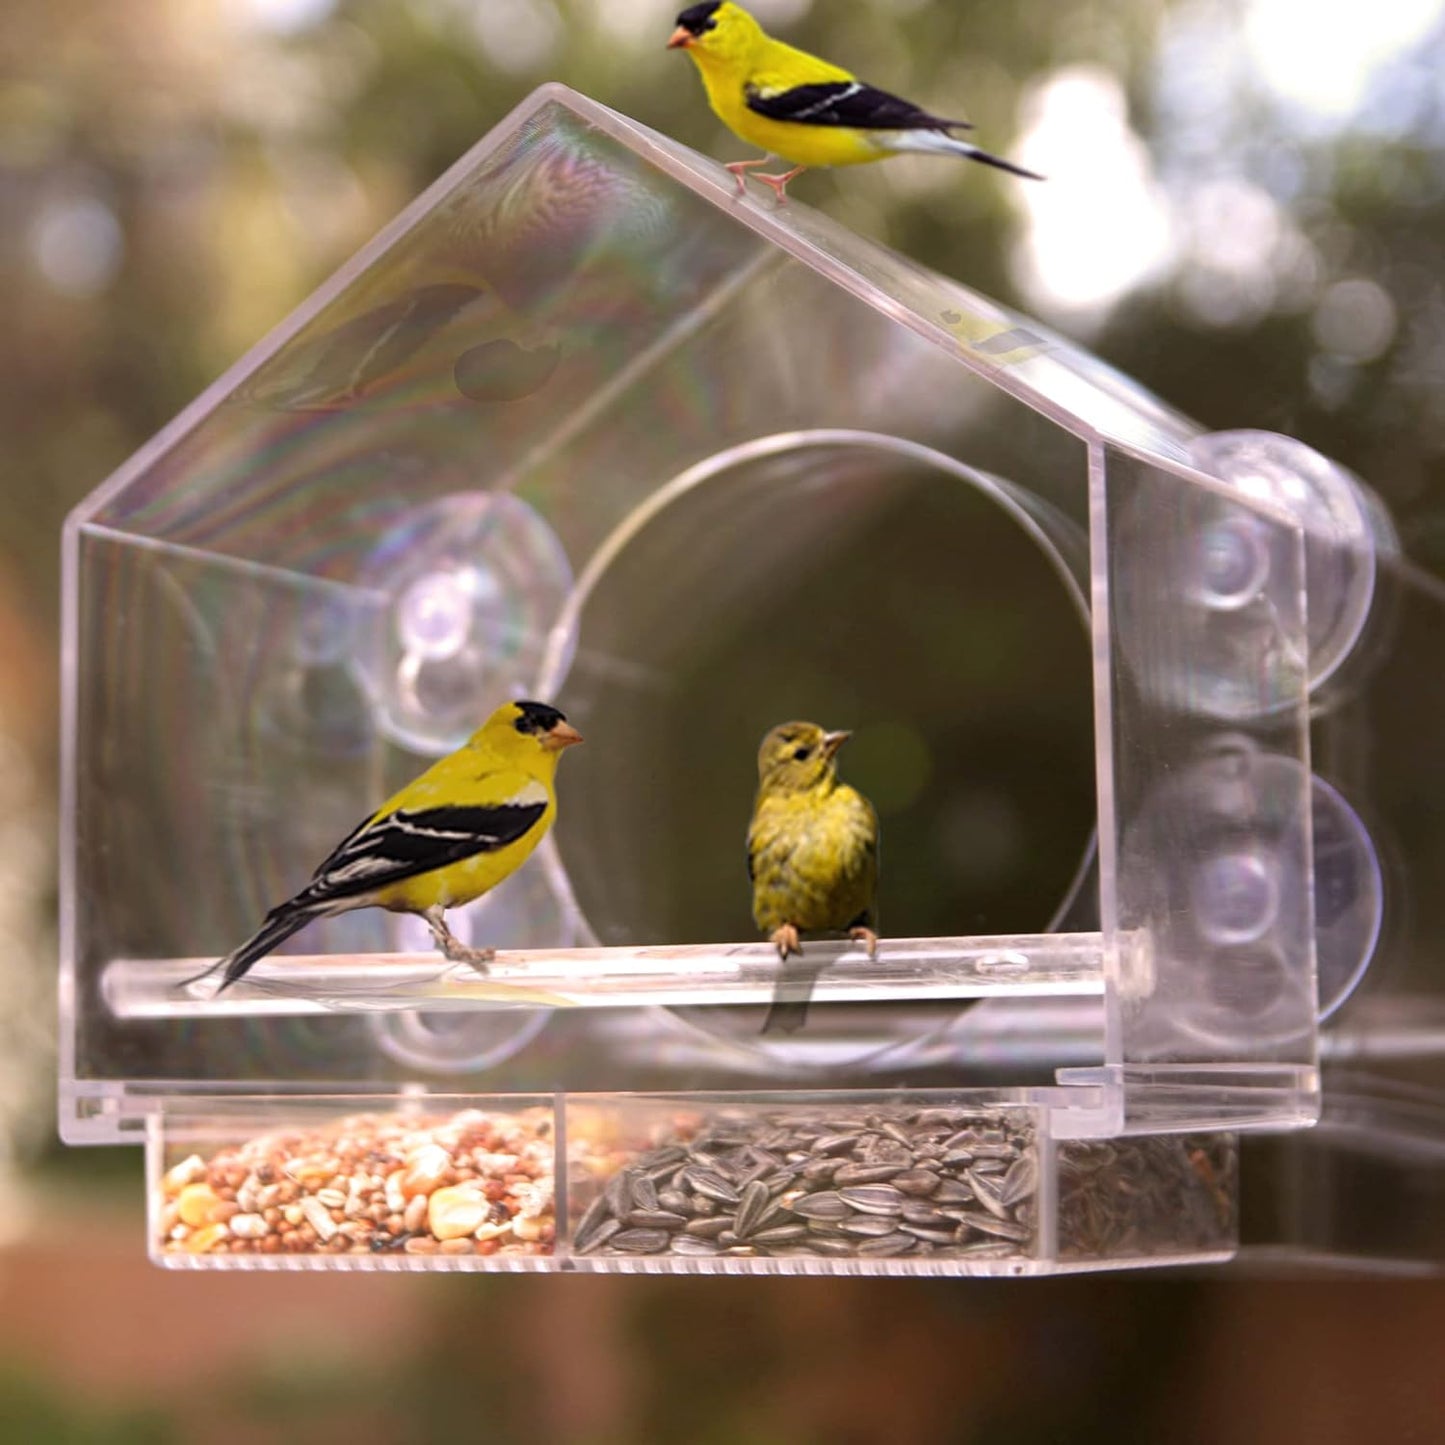 See-Through Window Bird Feeder with Strong Suction Grip - Perfect for Cats & Elderly Bird Watching, Easy Clean Design - Bring Nature Closer in Any Space